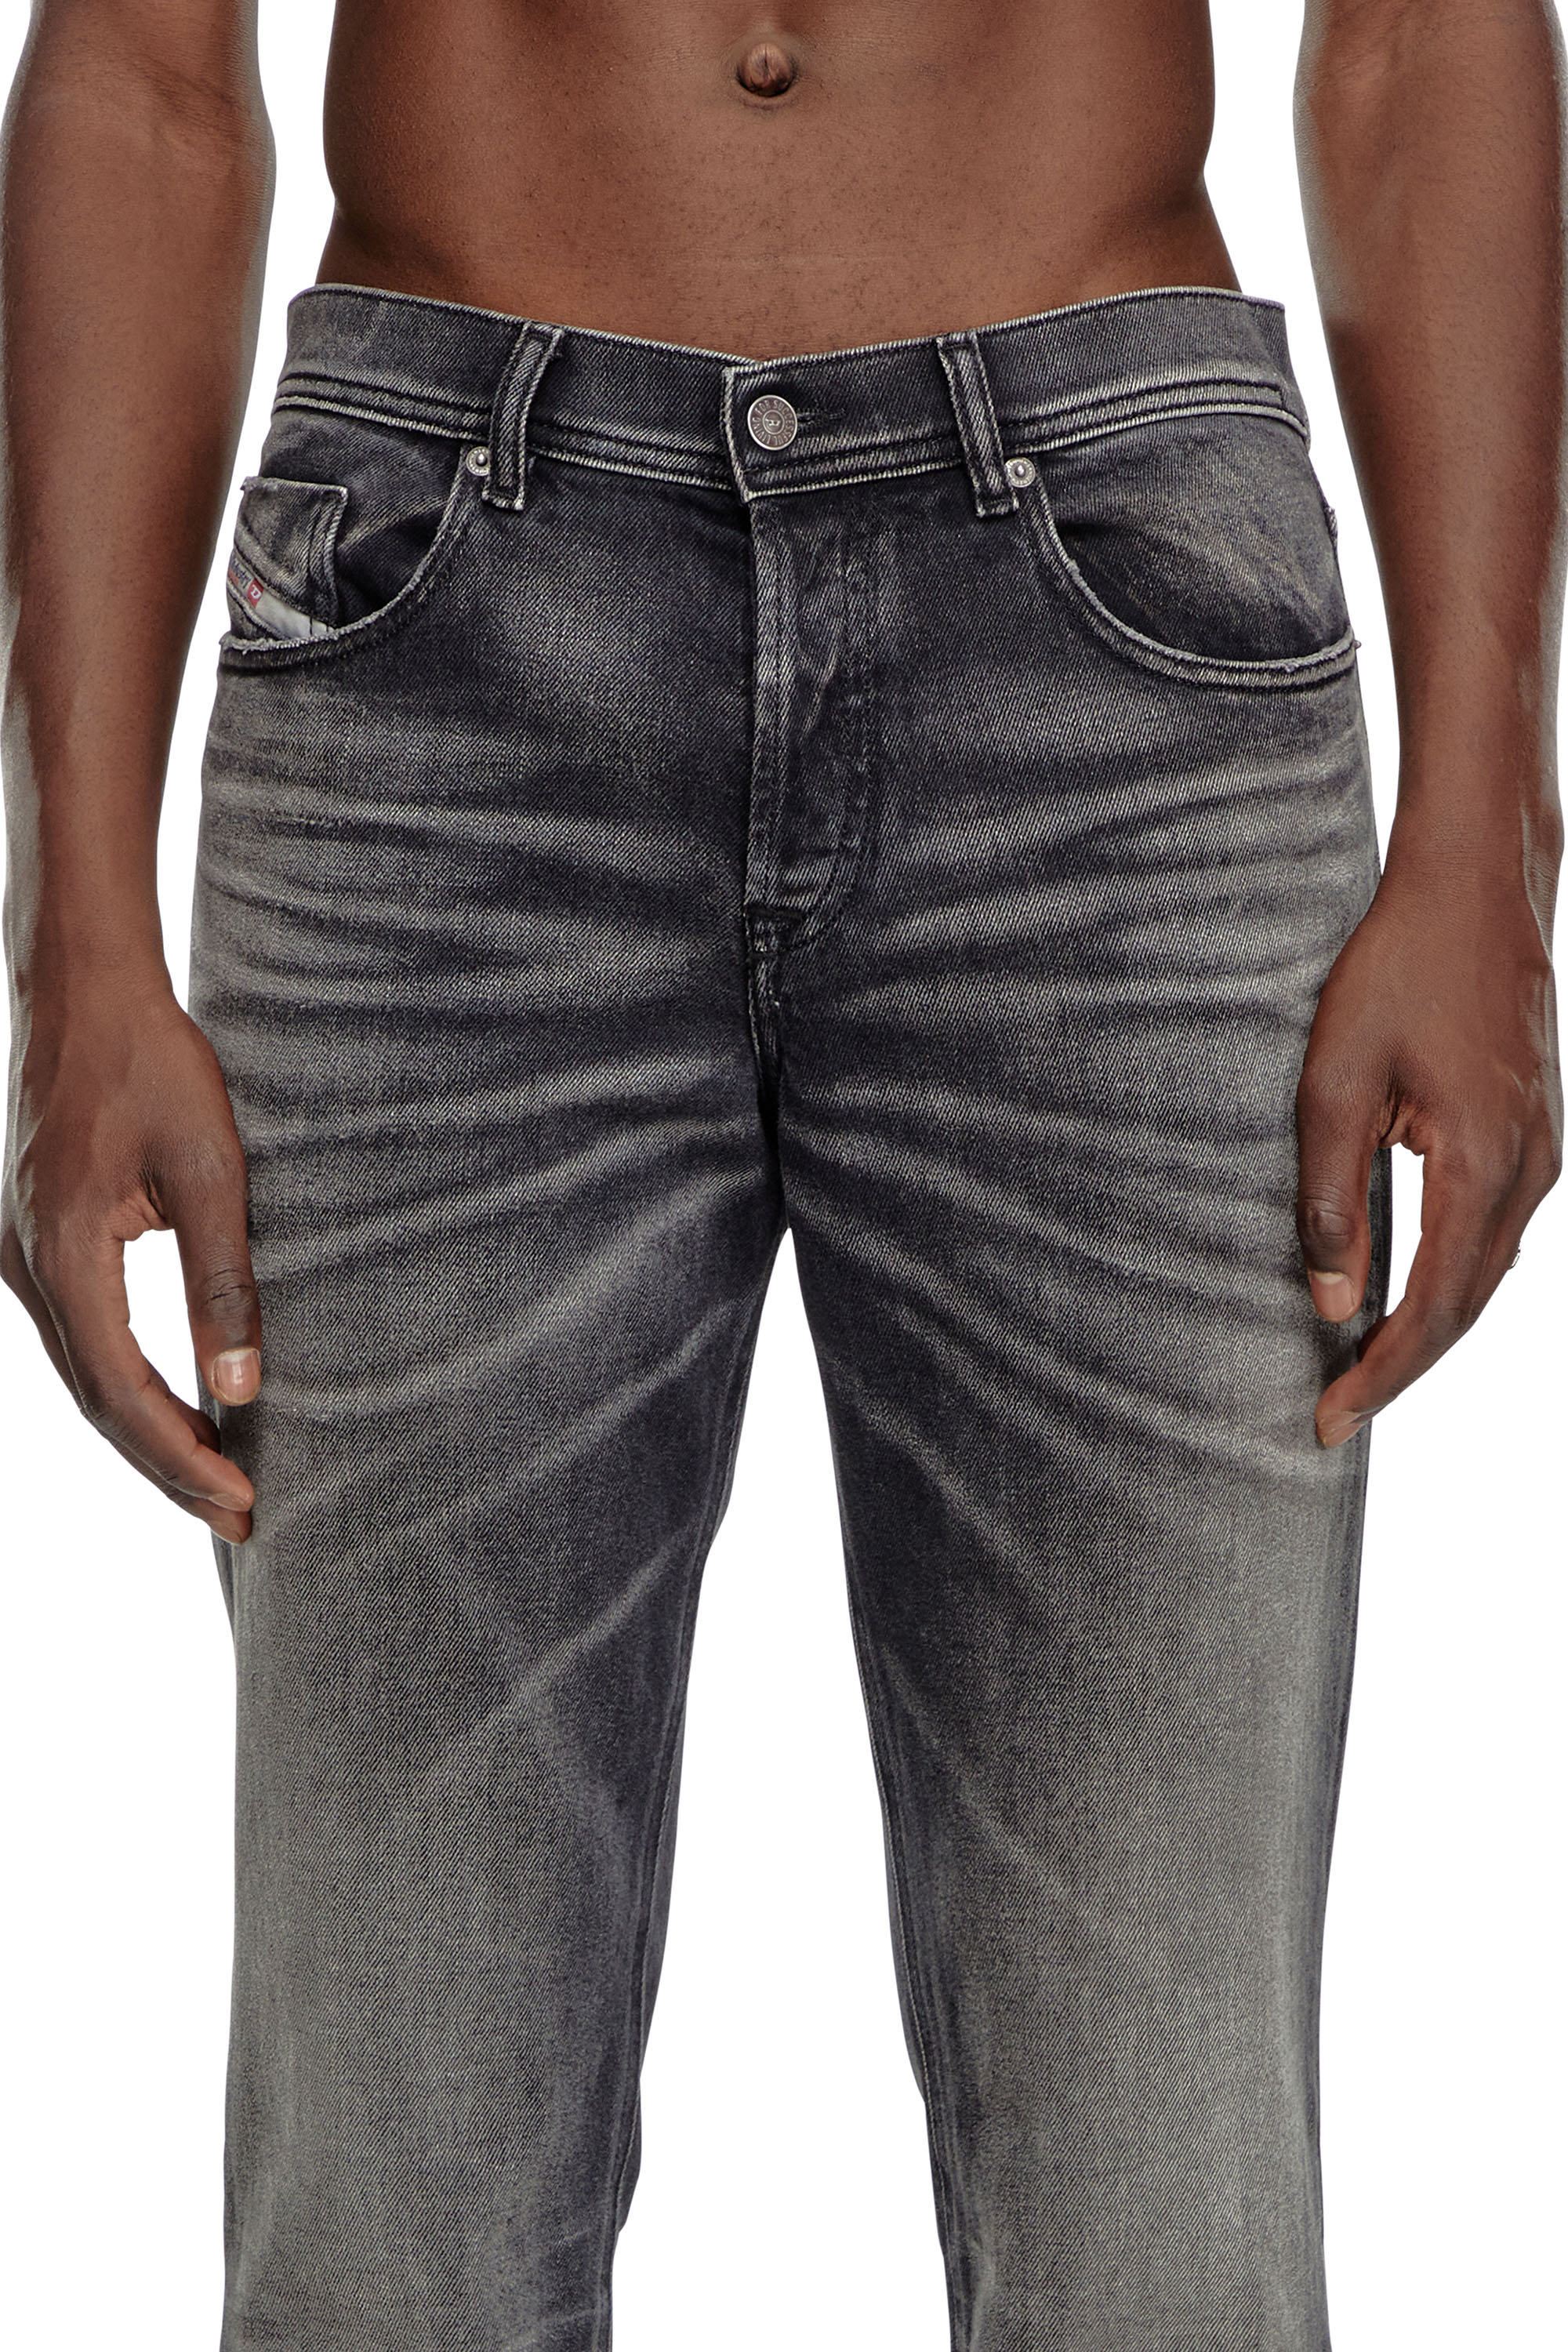 Diesel - Tapered Jeans 2023 D-Finitive 09J65, Hombre Tapered Jeans - 2023 D-Finitive in Negro - Image 5